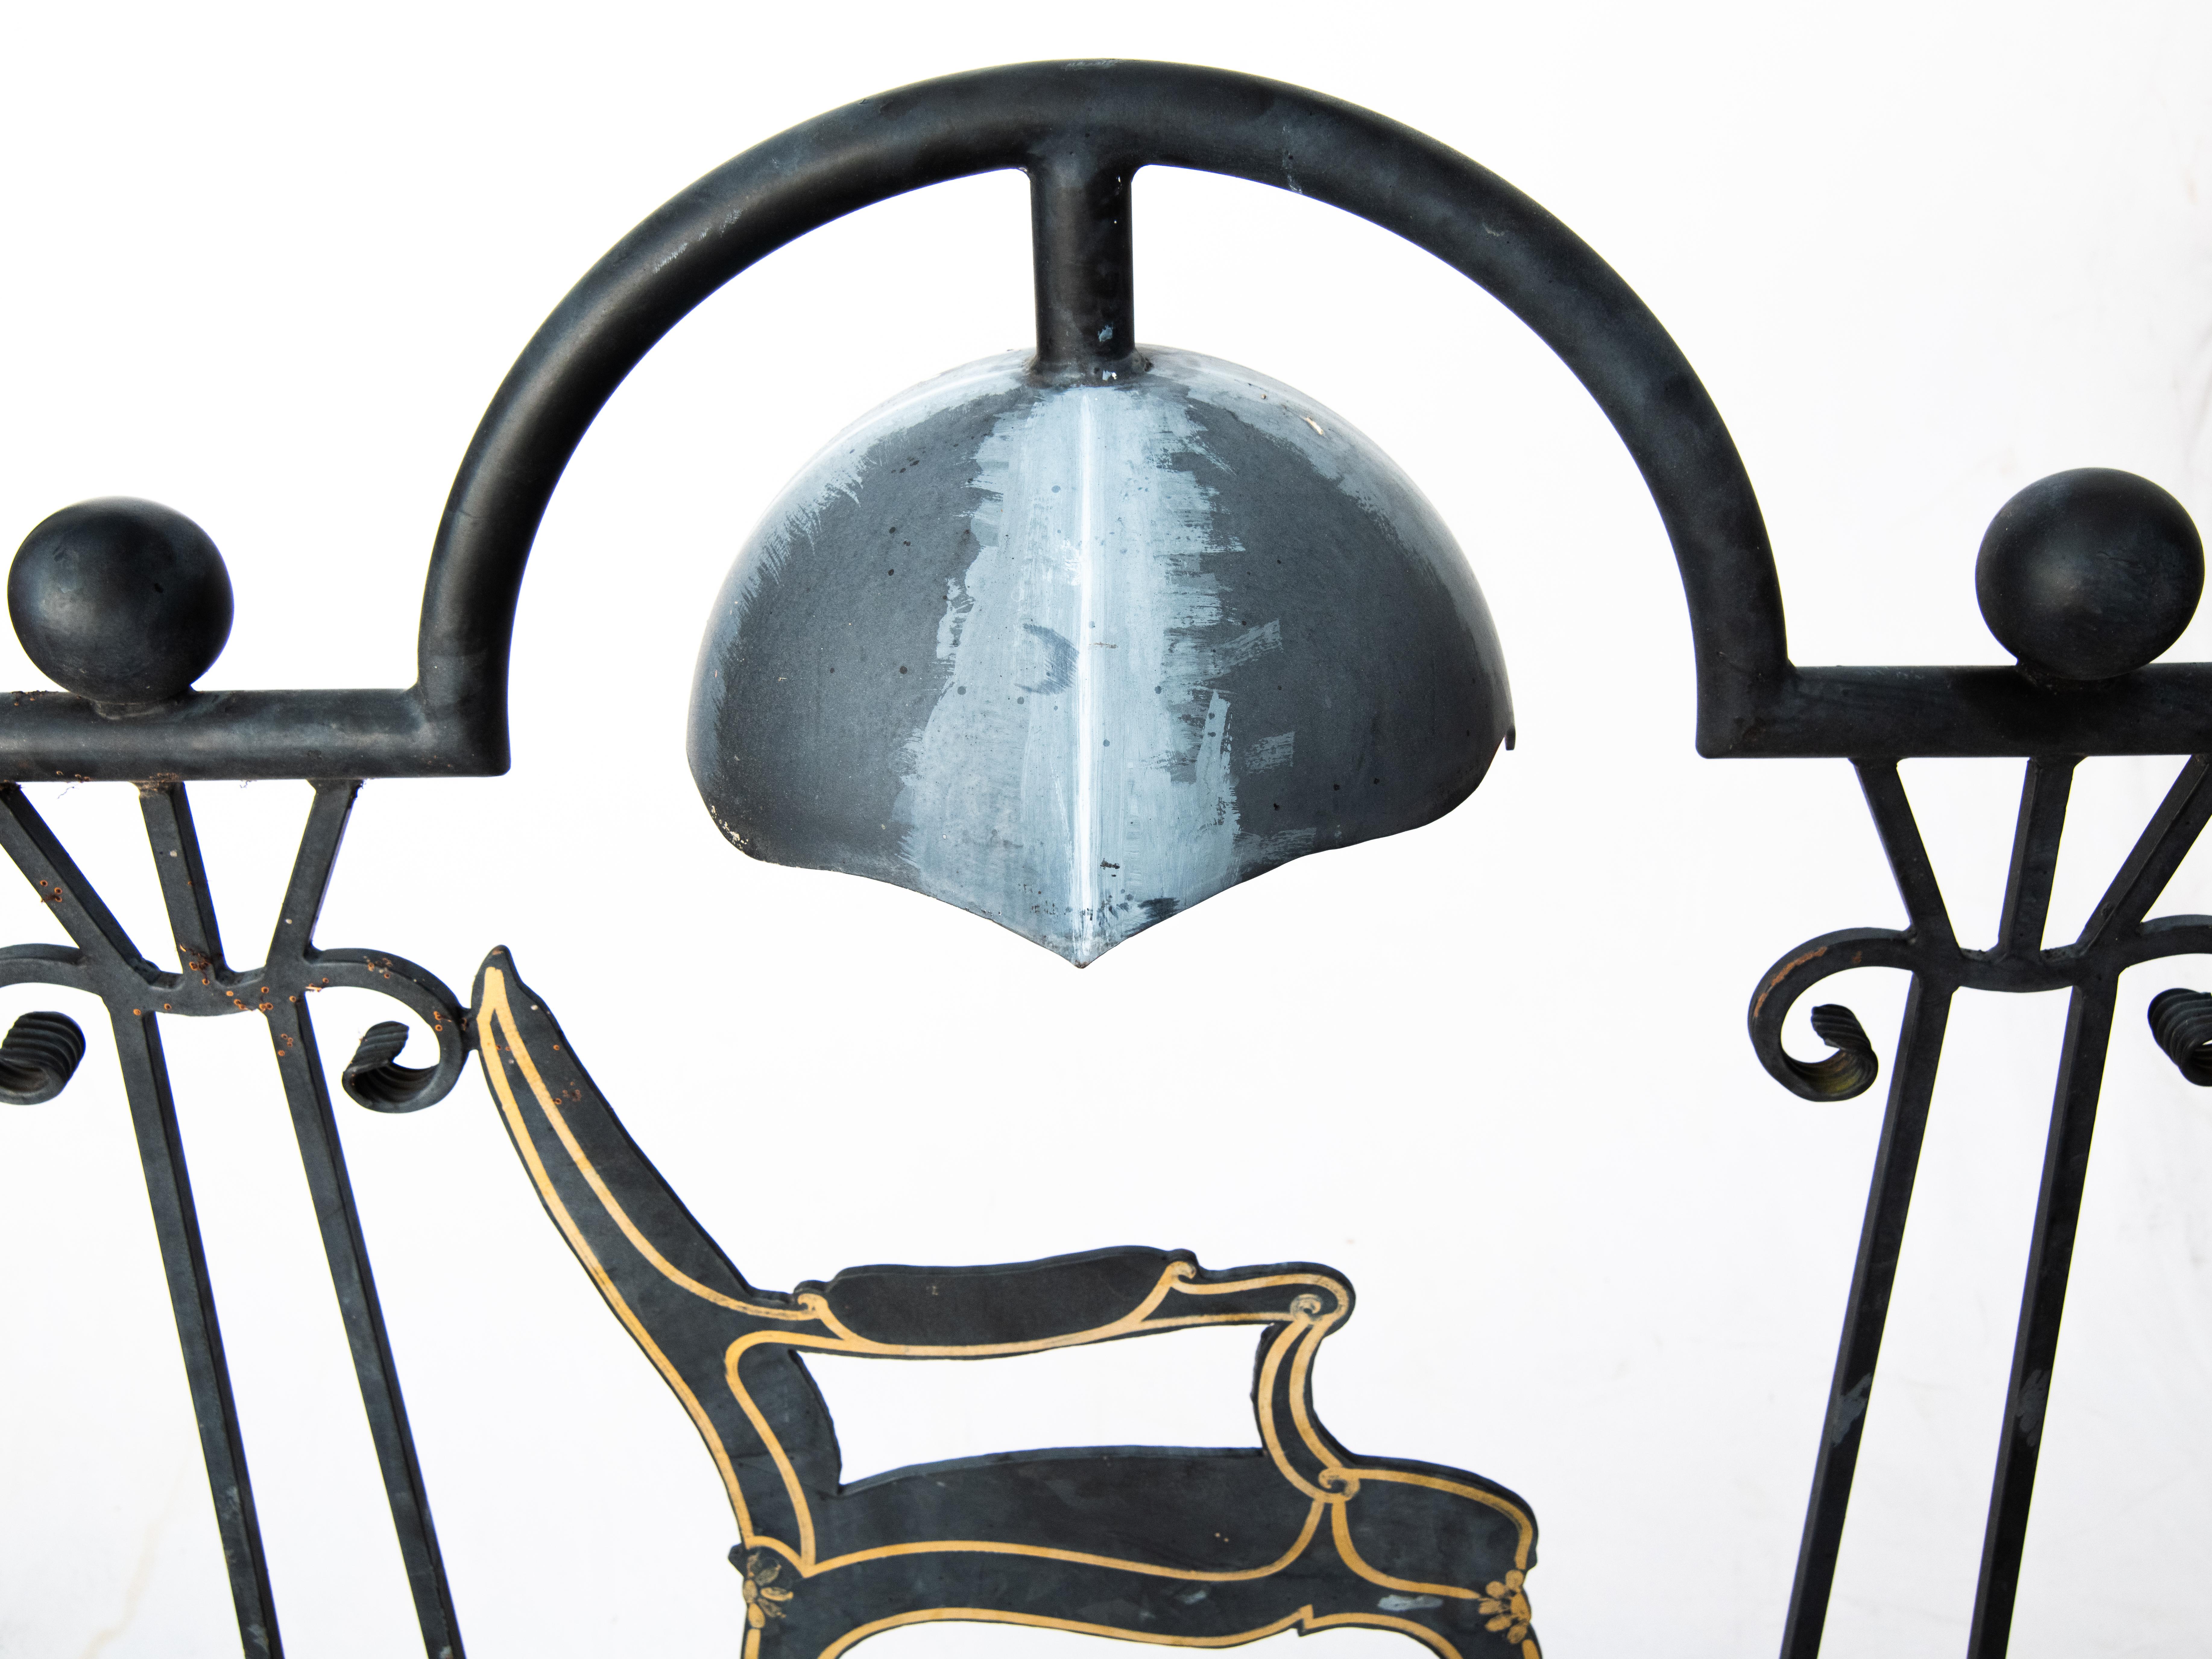 Vintage wrought iron exterior shop sign for antique/furniture/interior design business. Painted black with gold accents. Wired with a light bulb socket concealed in the 